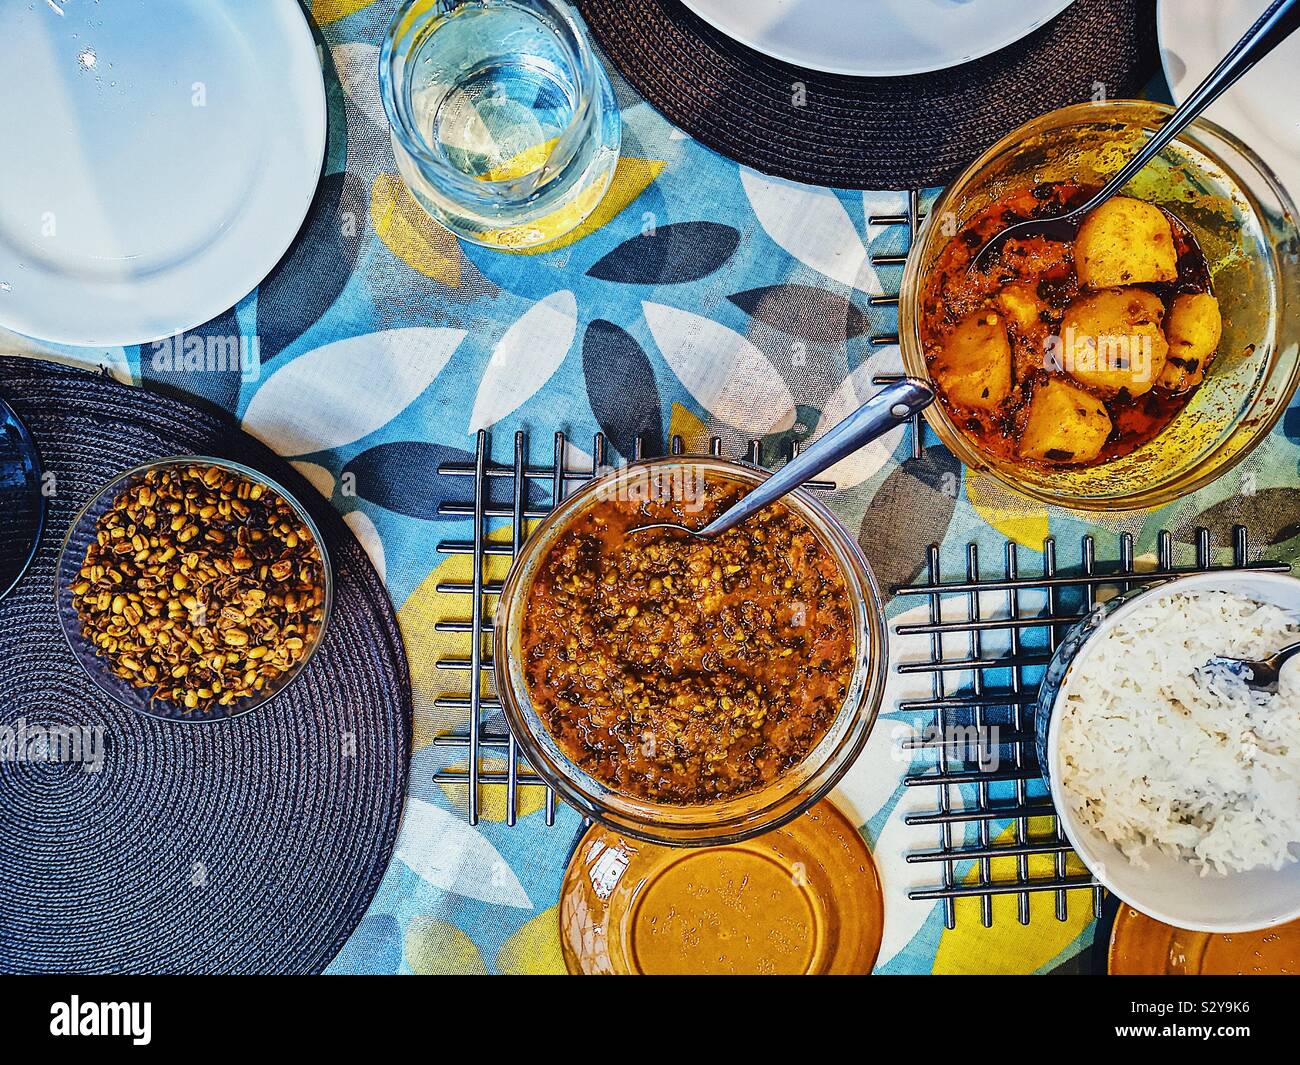 Elevated view of homemade Indian meal with bean sprouts, mung dal, potato curry and rice Stock Photo